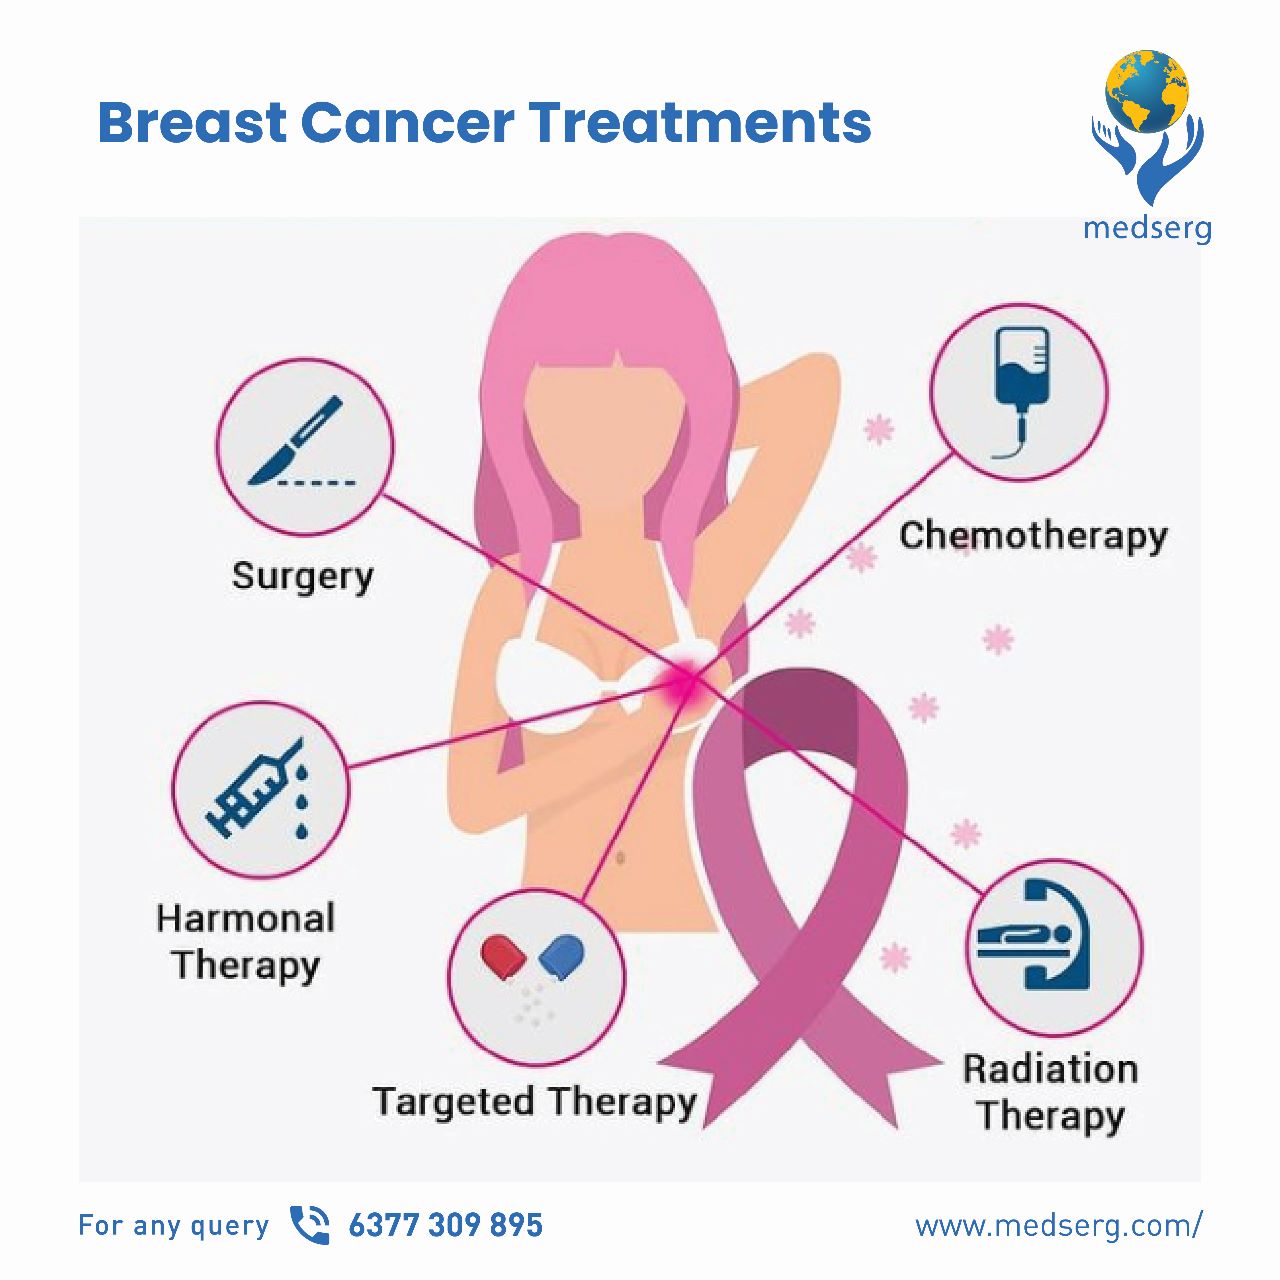 What are the main causes and risk factors of breast cancer?